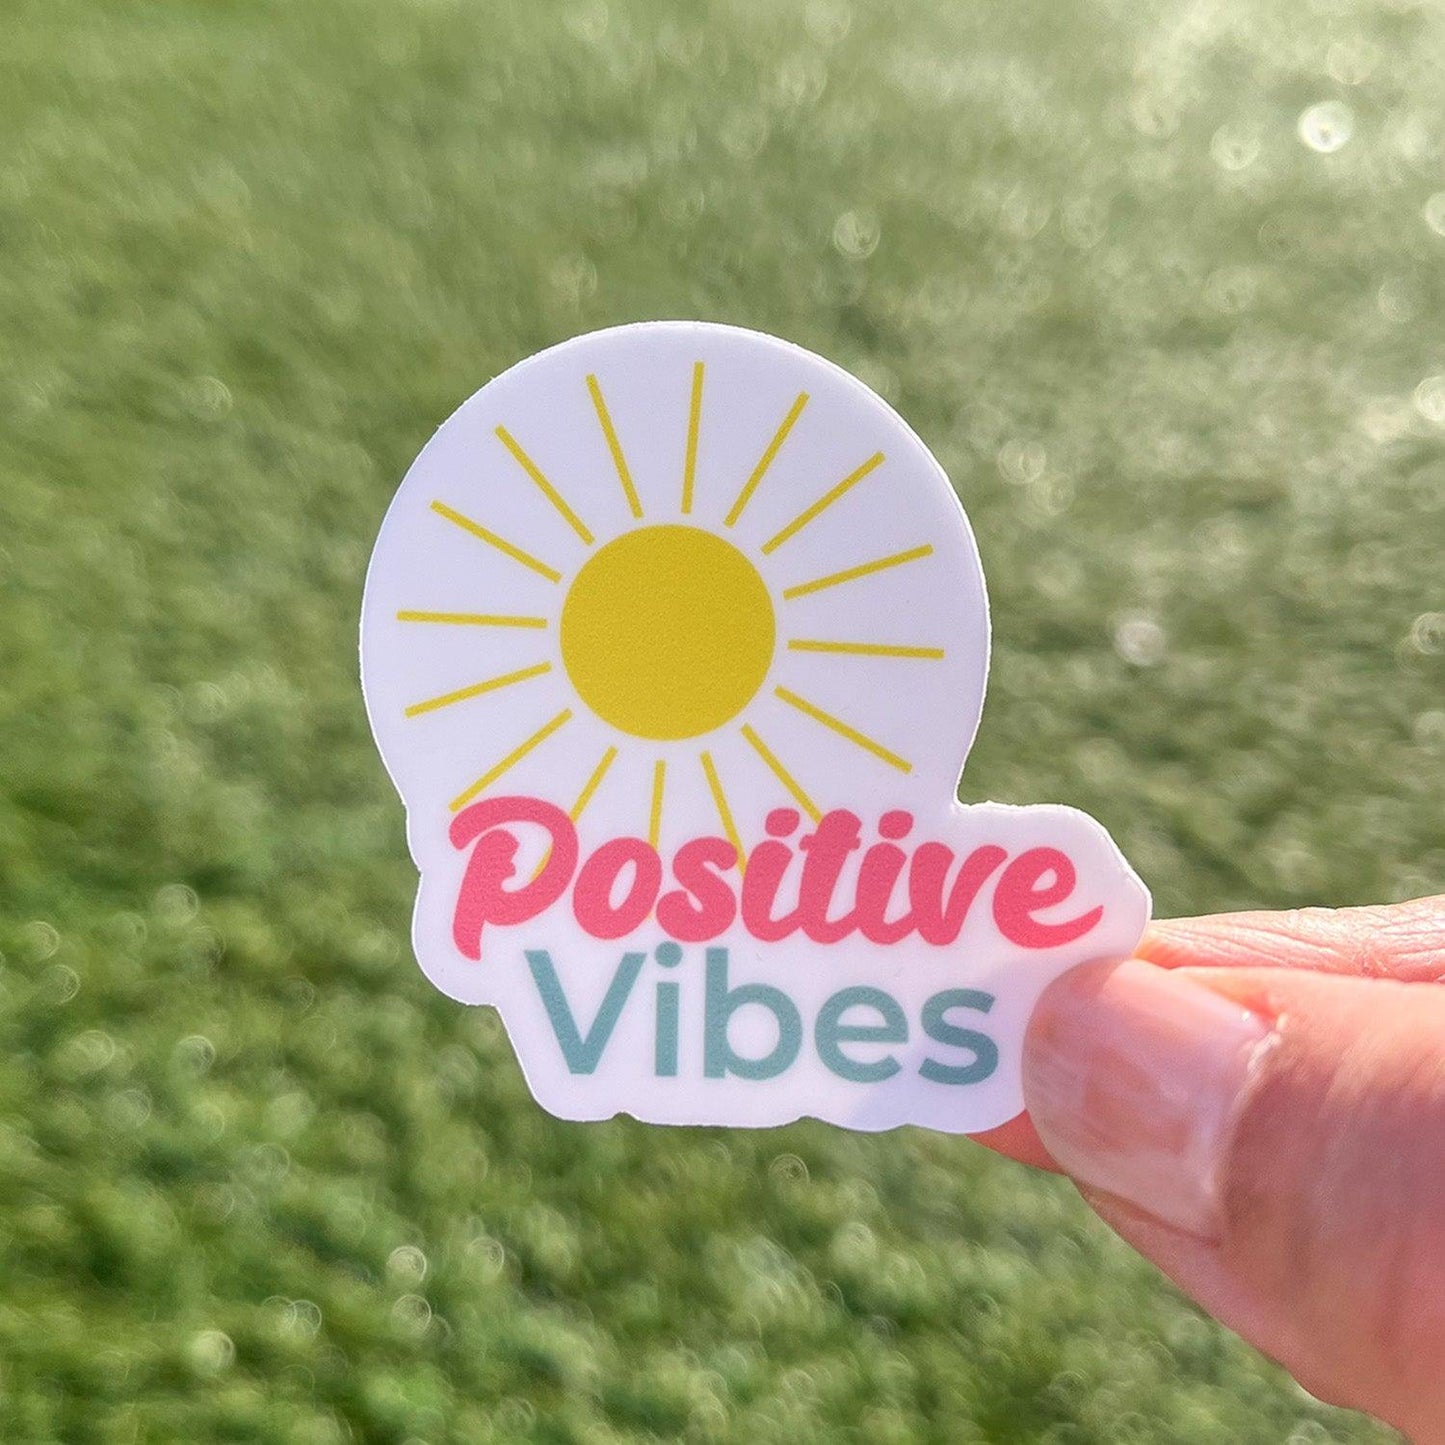 Positive Vibes sticker with grass and sunshine in the background